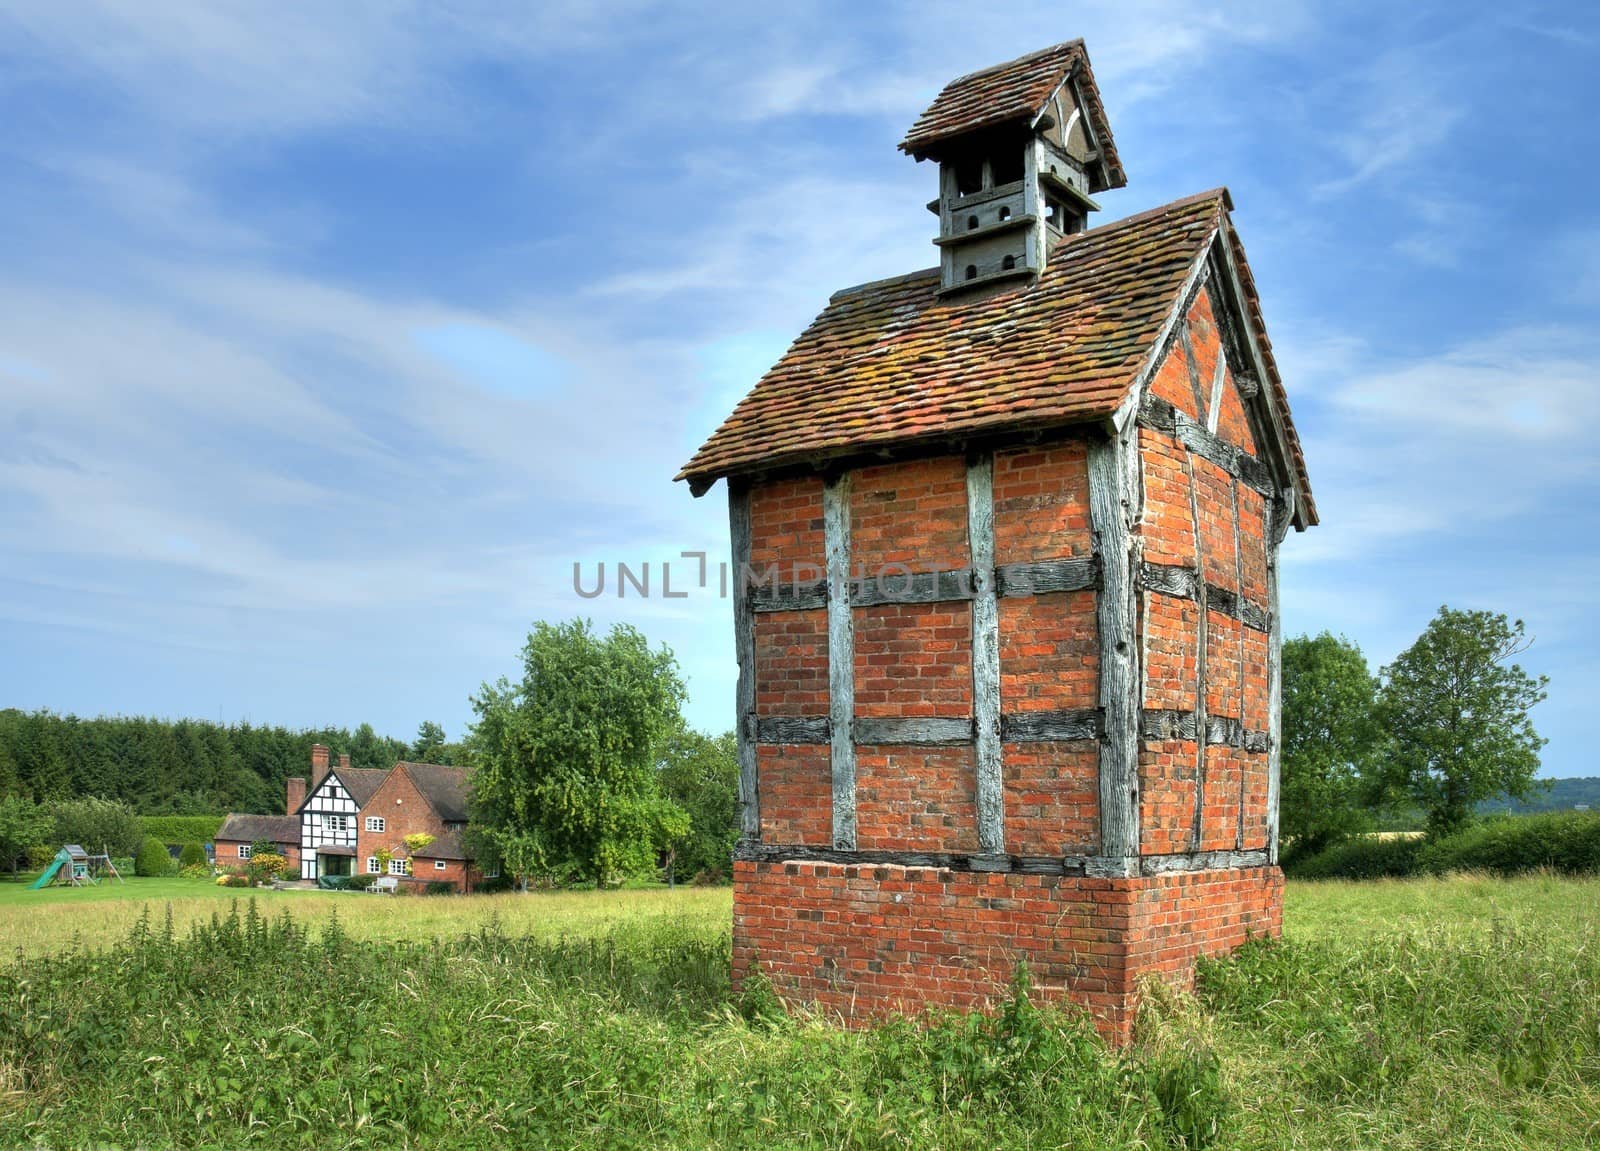 Timber-frame and brick dovecote, Hanbury, Worcestershire, England.